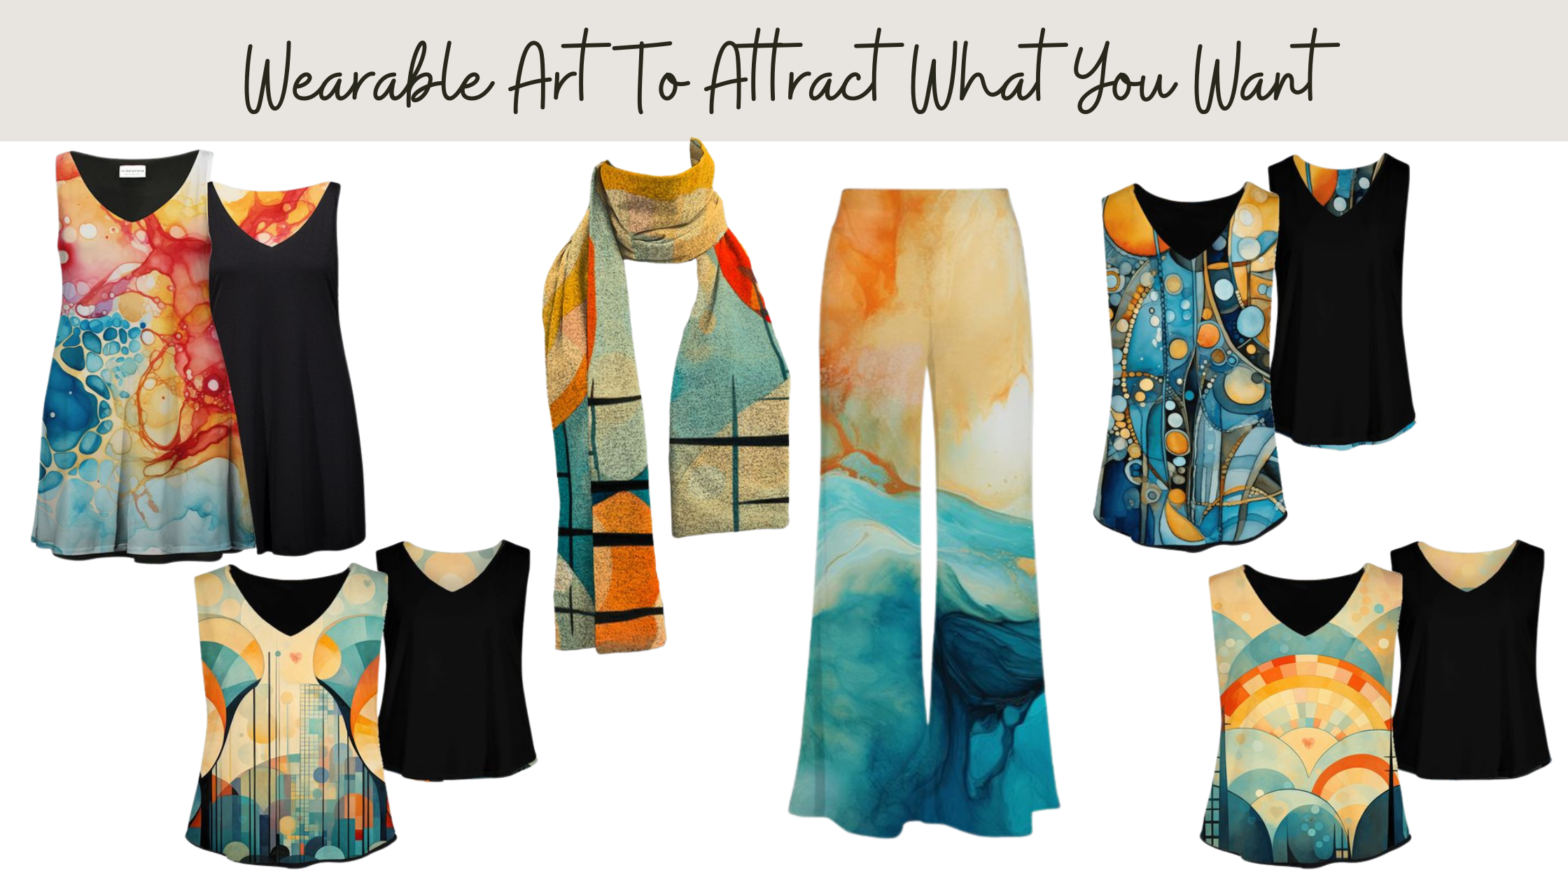 Wearable Art to Attract What You Want by Mary Ann Benoit. Energy art on Le Galeriste.